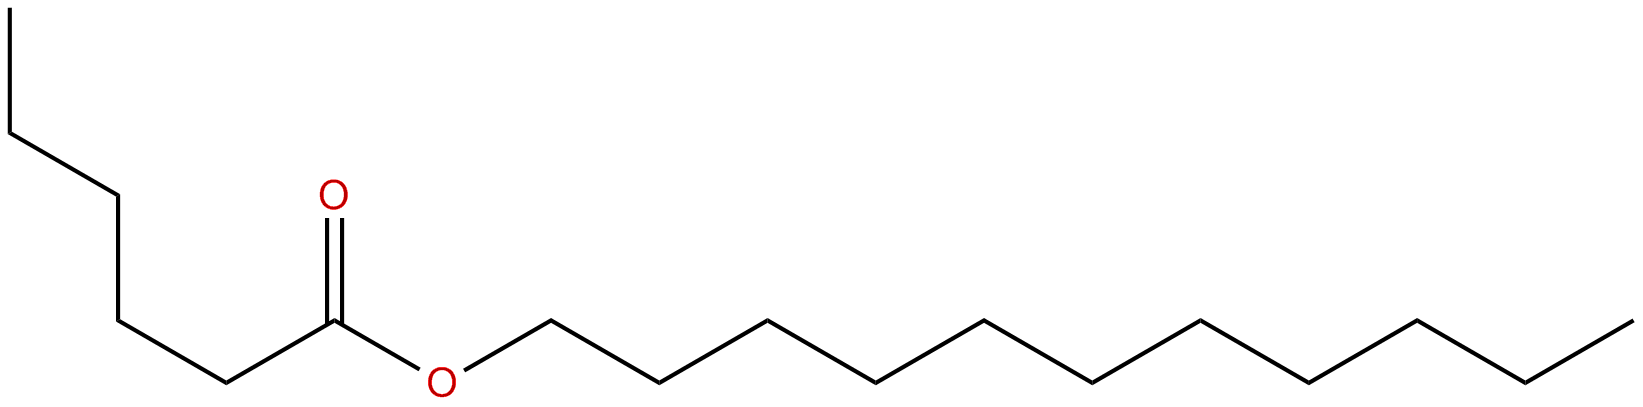 Image of undecyl hexanoate